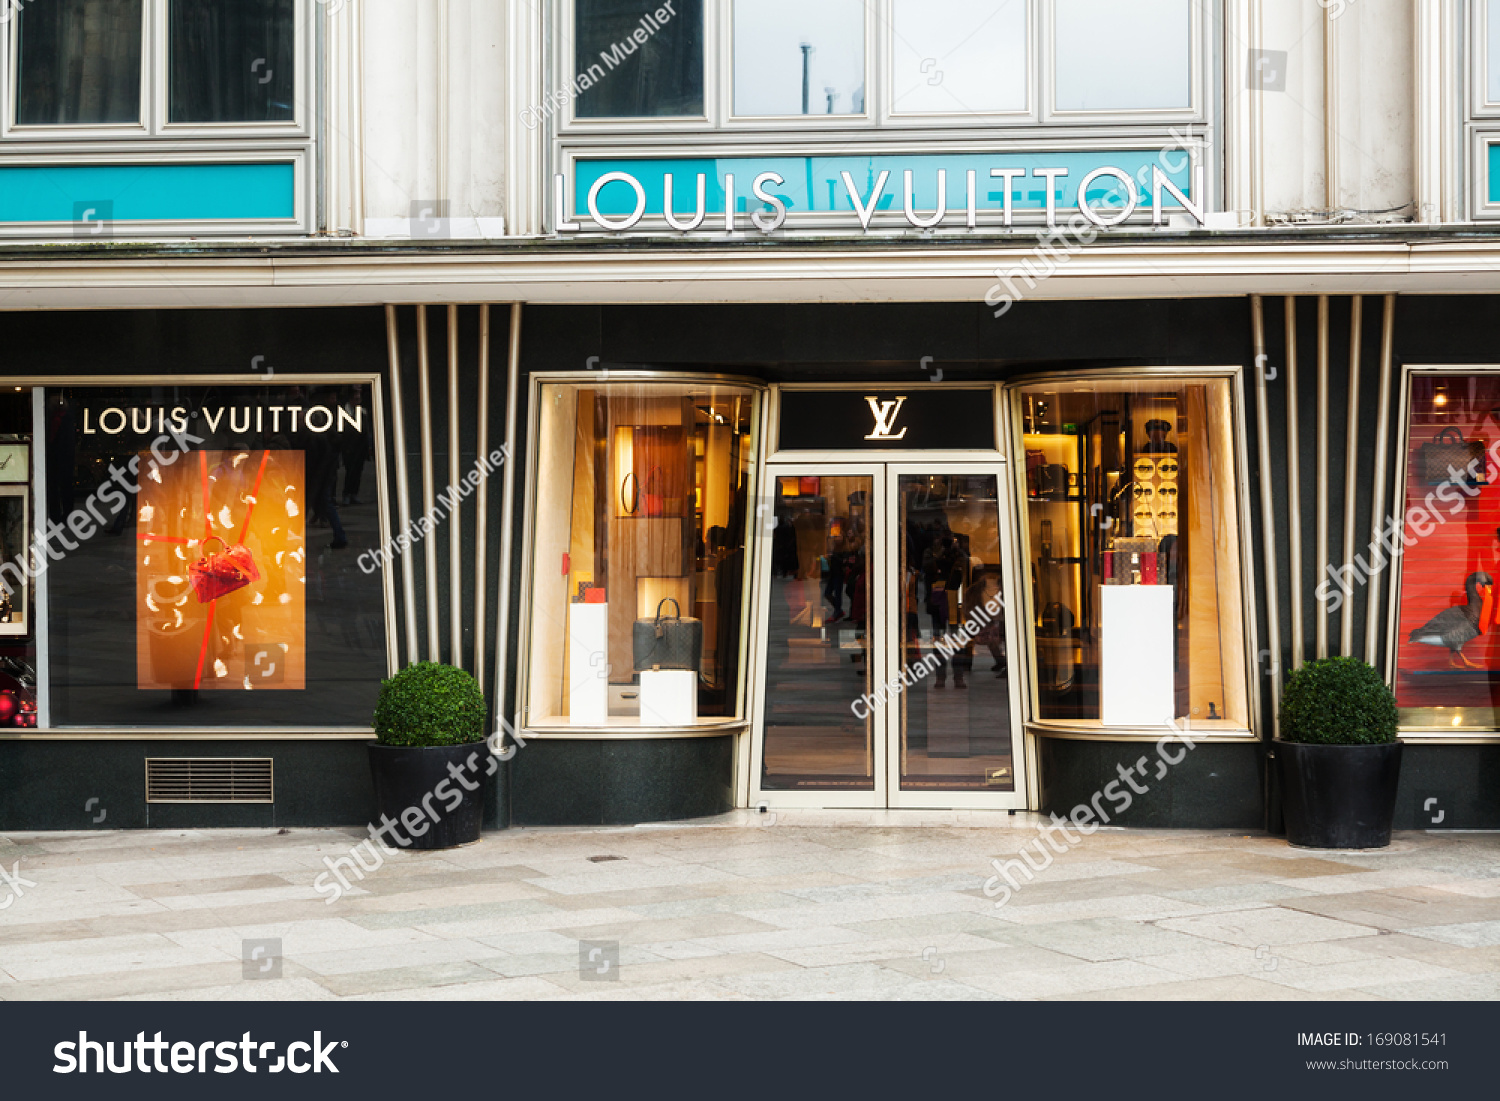 Cologne, Germany - December 18: Louis Vuitton Store On December 18, 2013 In Cologne. Louis ...